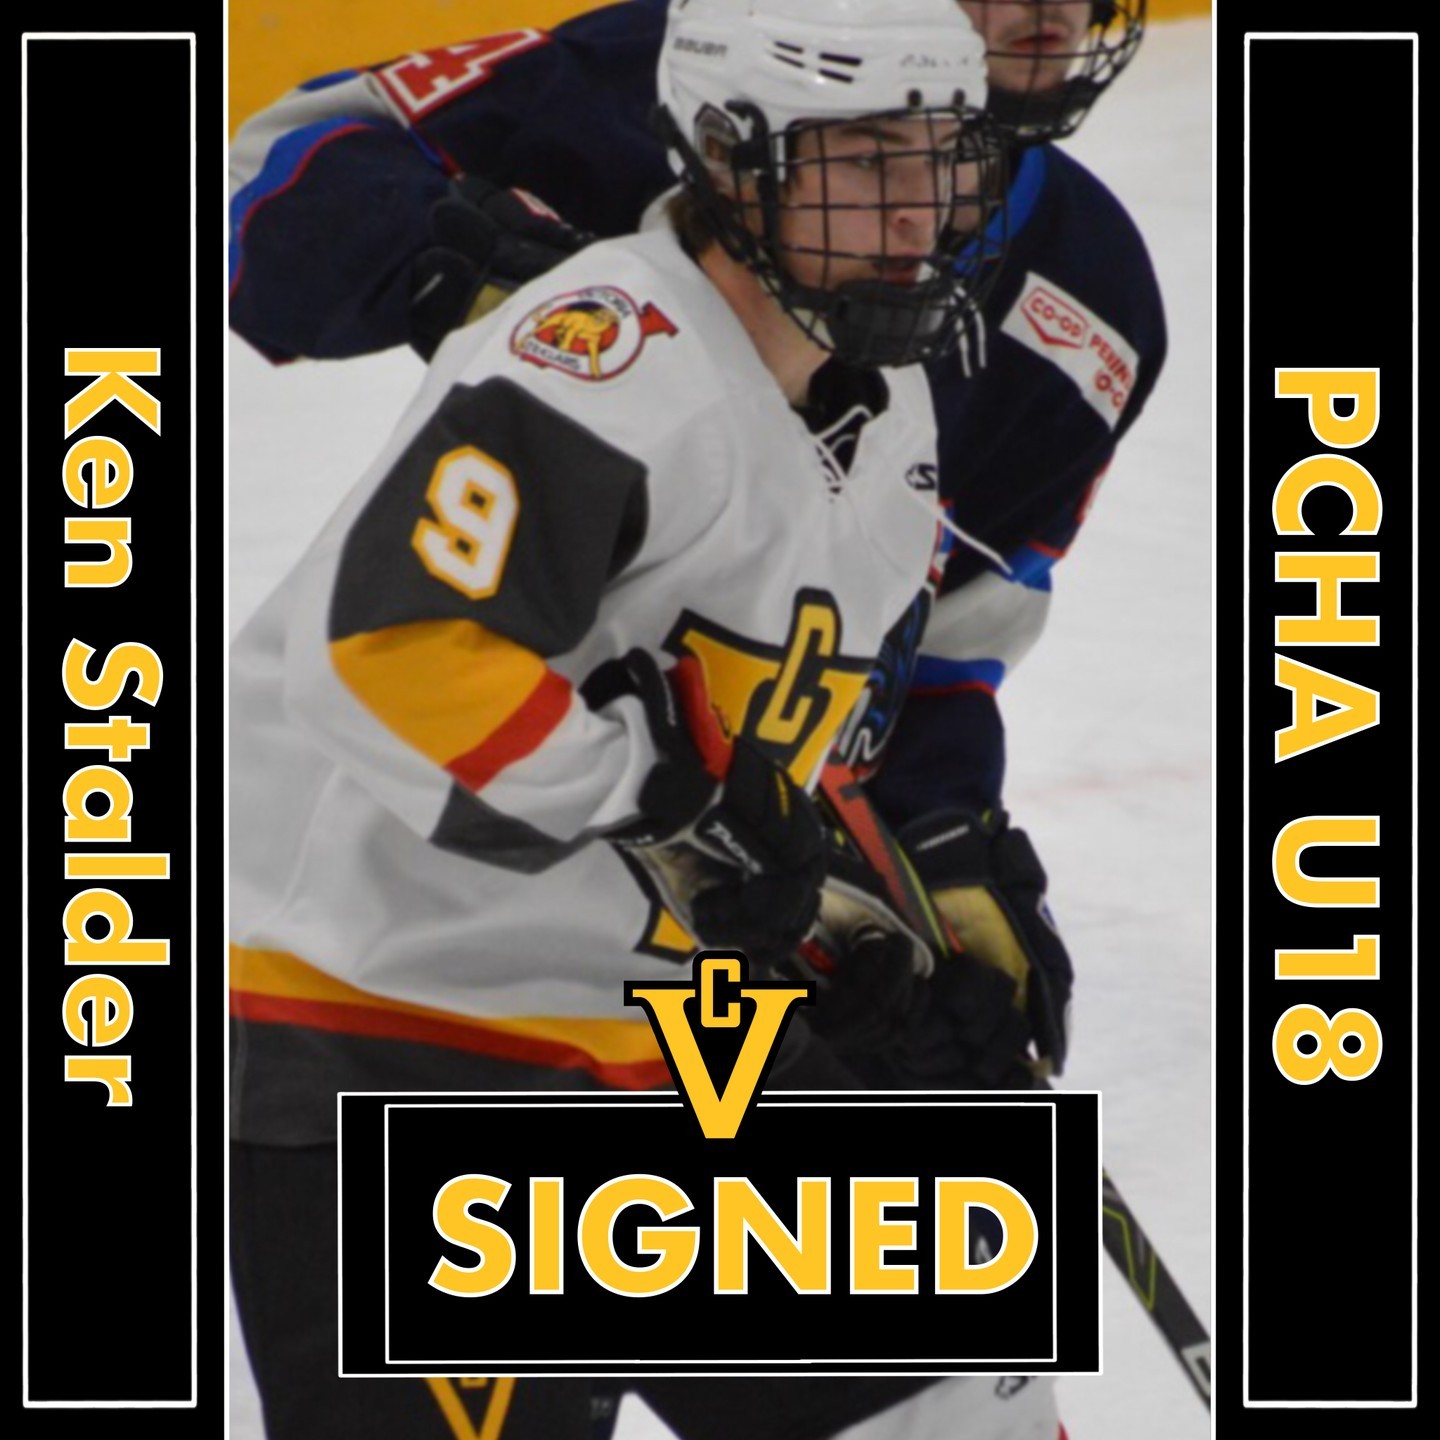 SIGNED: Ken Stalder. The 05 born forward hailing from Whitehorse will join the Cougars for the upcoming season.